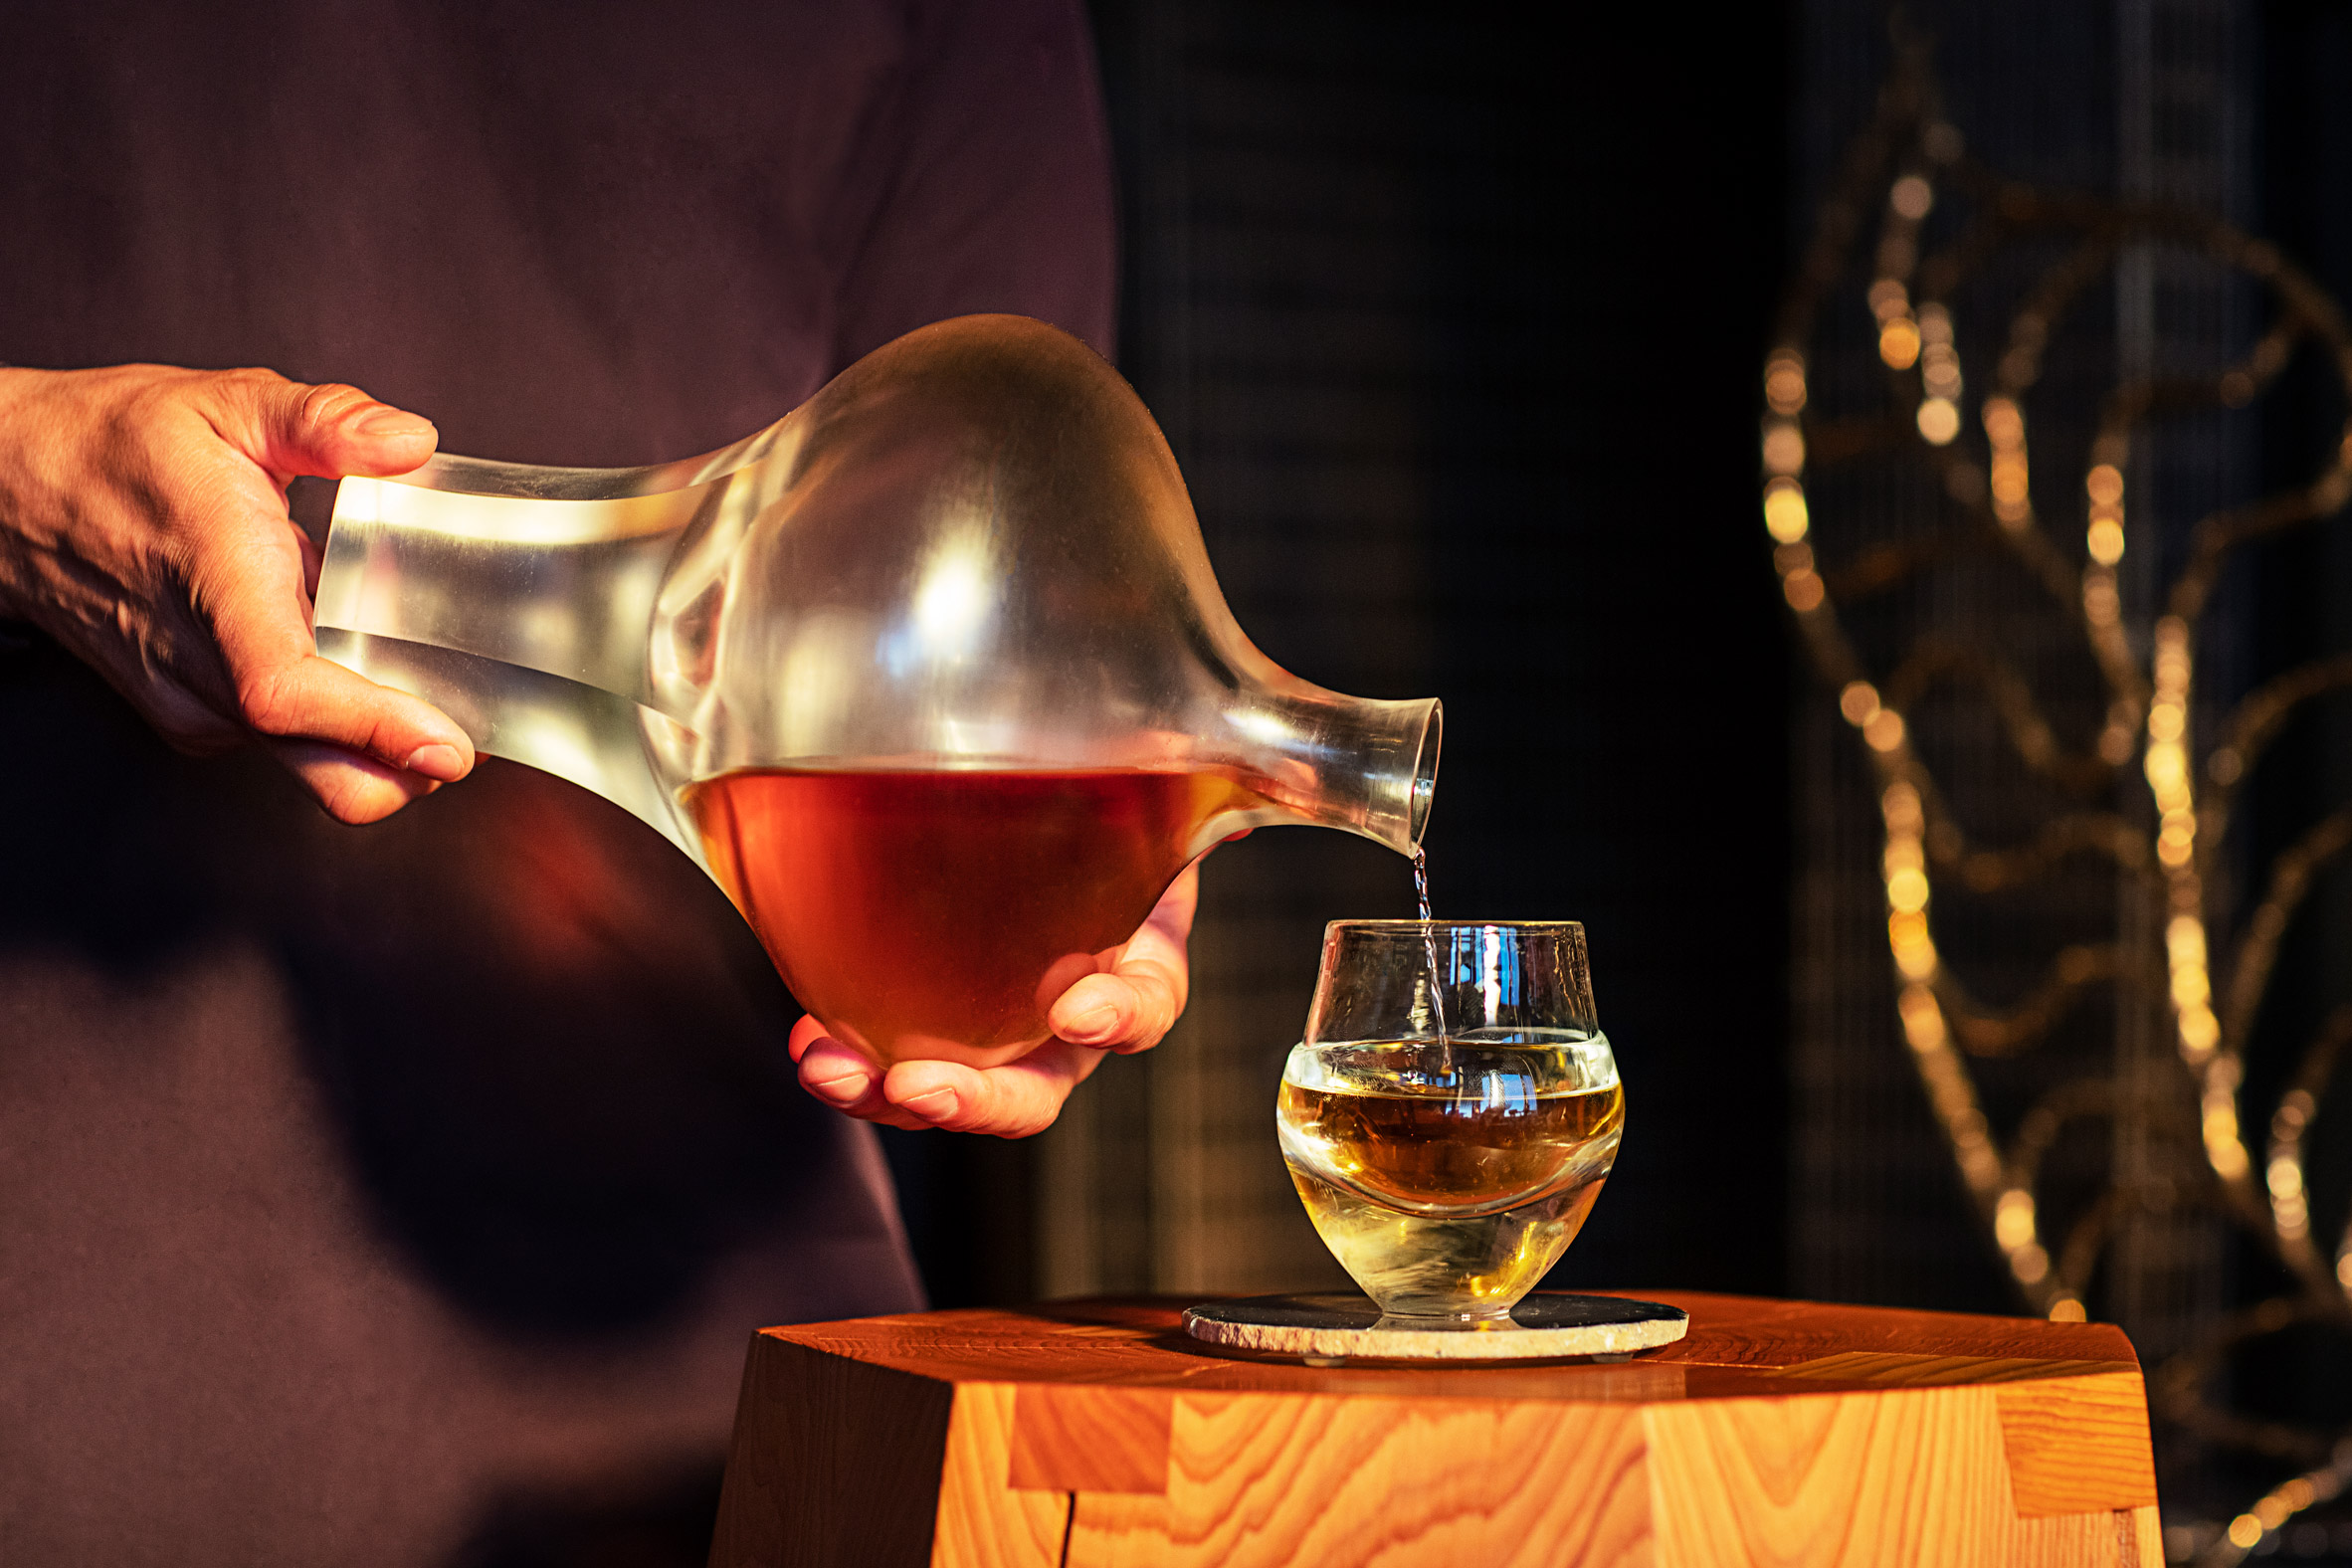 A photograph of whisky being poured from a decanter